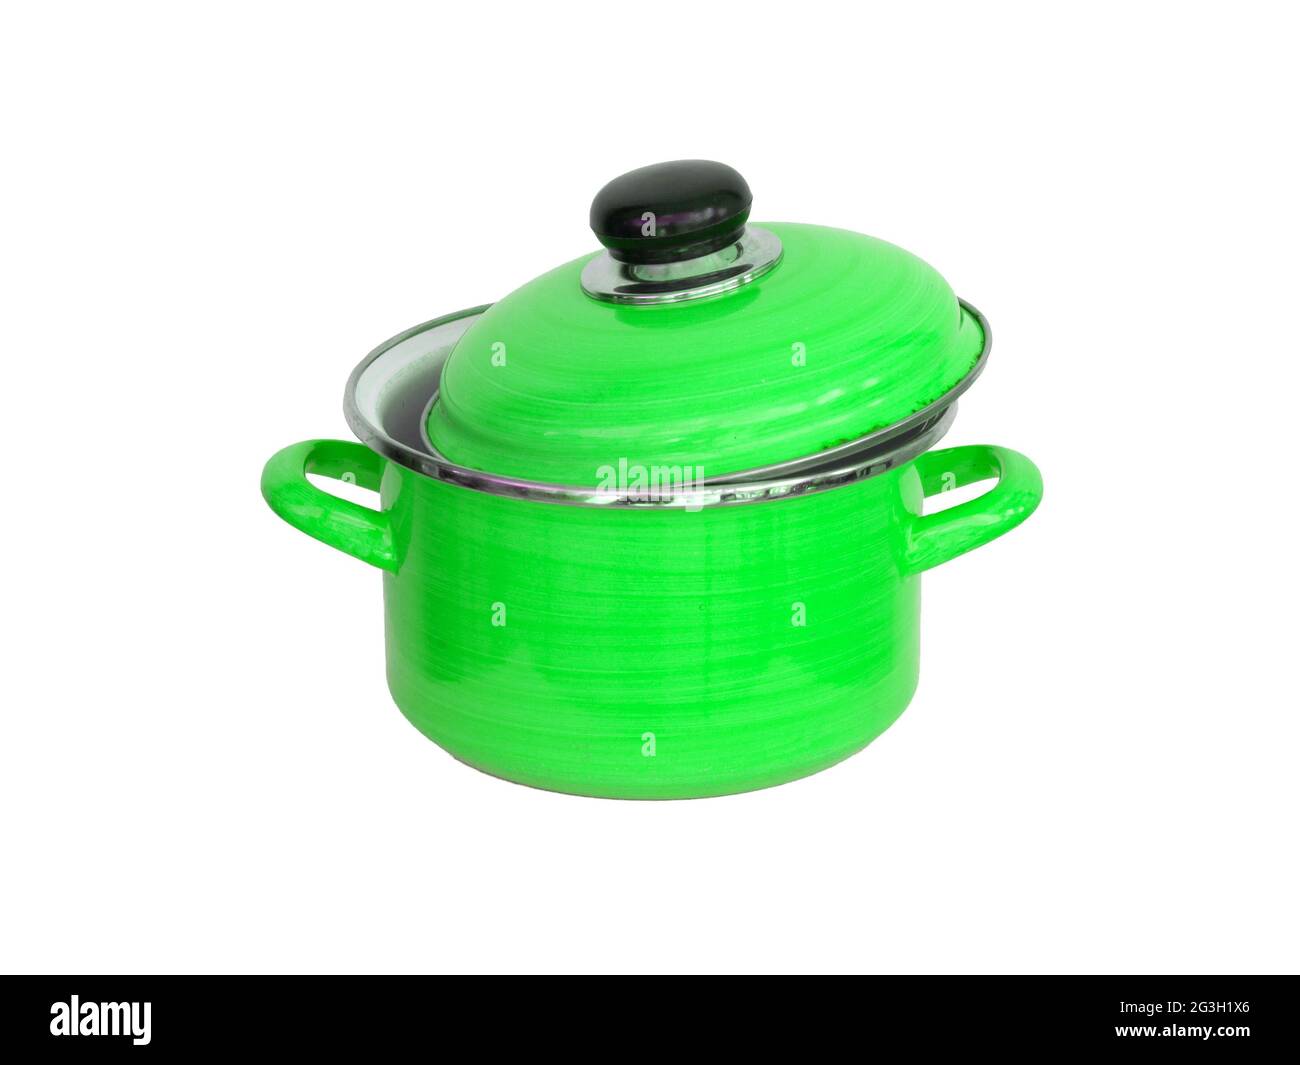 Old green metal cooking pot Stock Photo